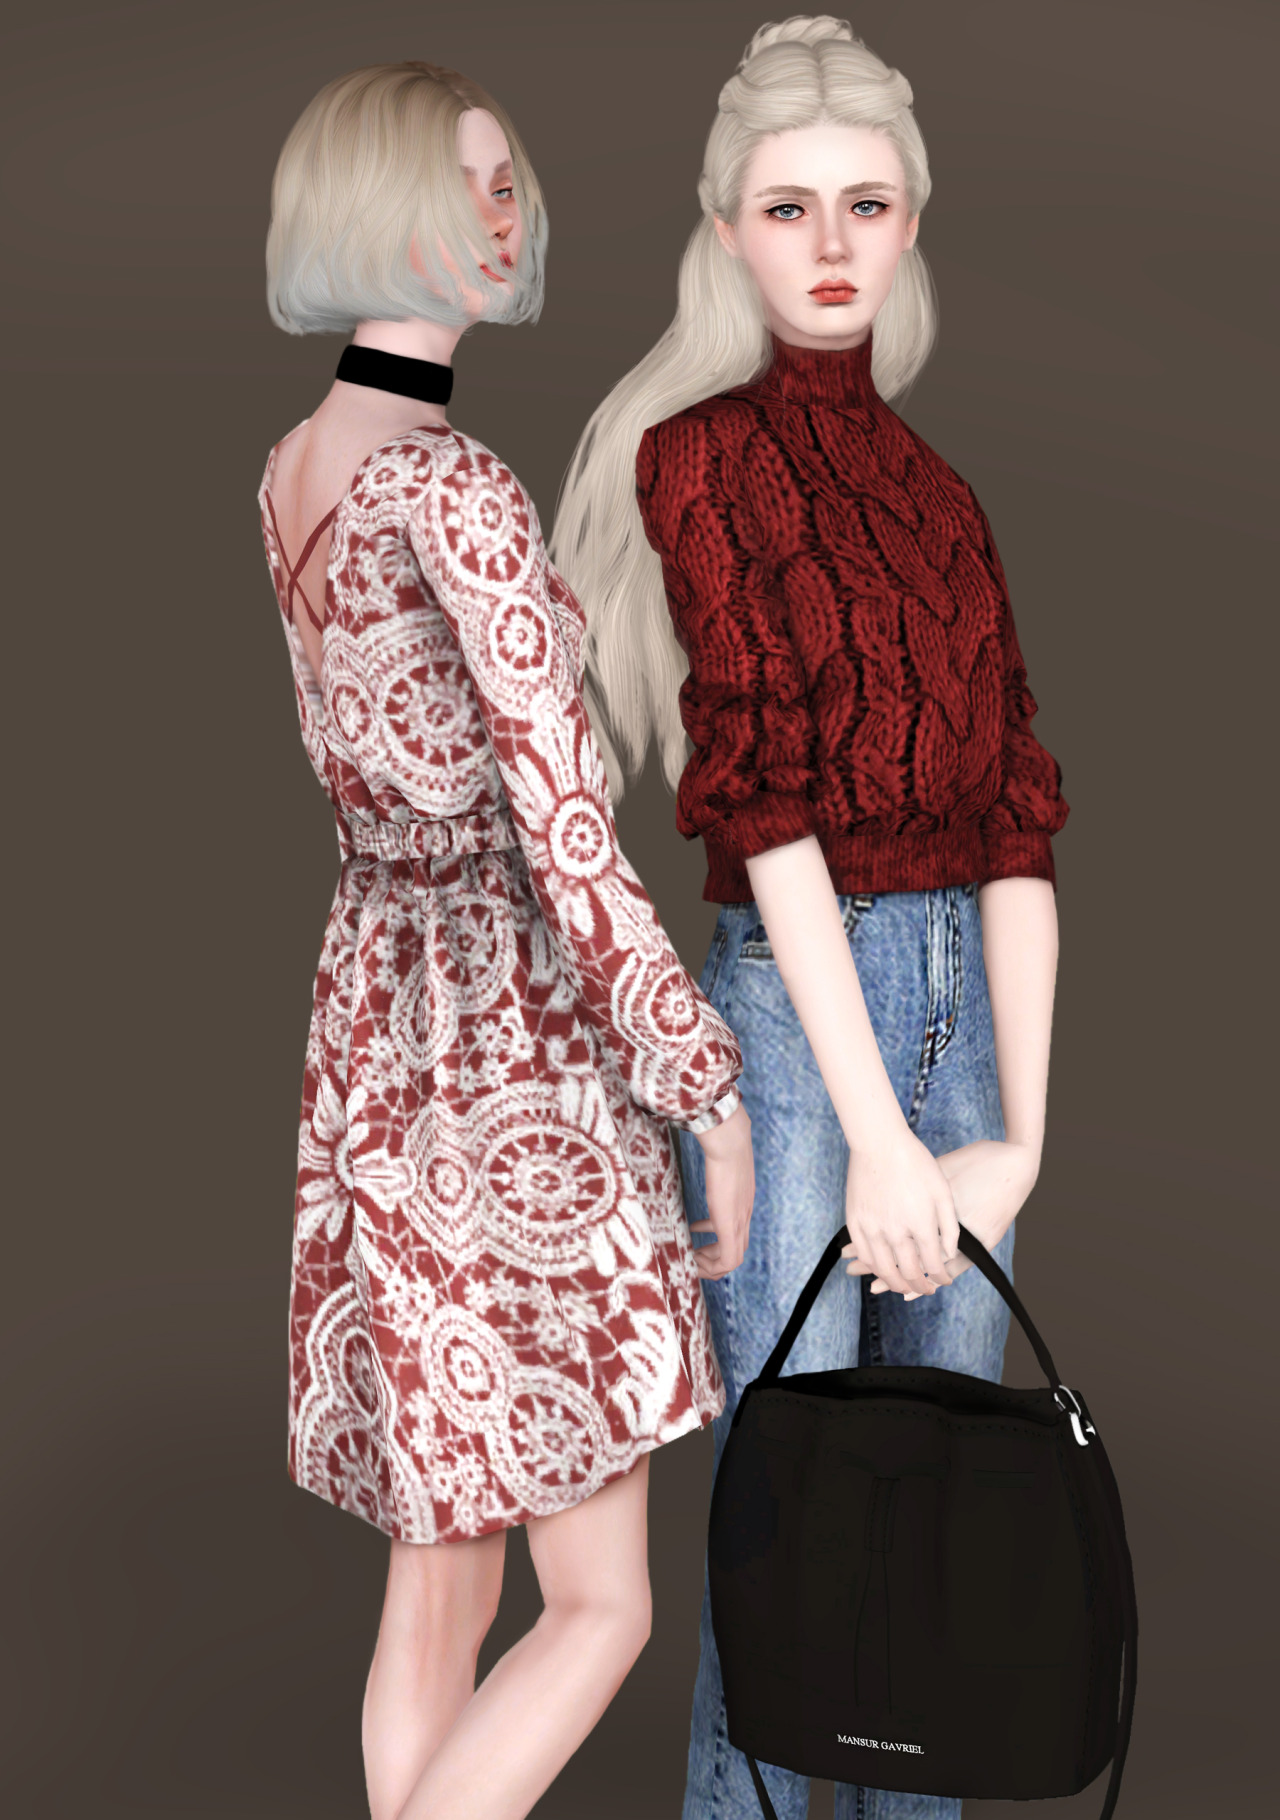 CCsims — spectacledchic: DAZE January Collection by...